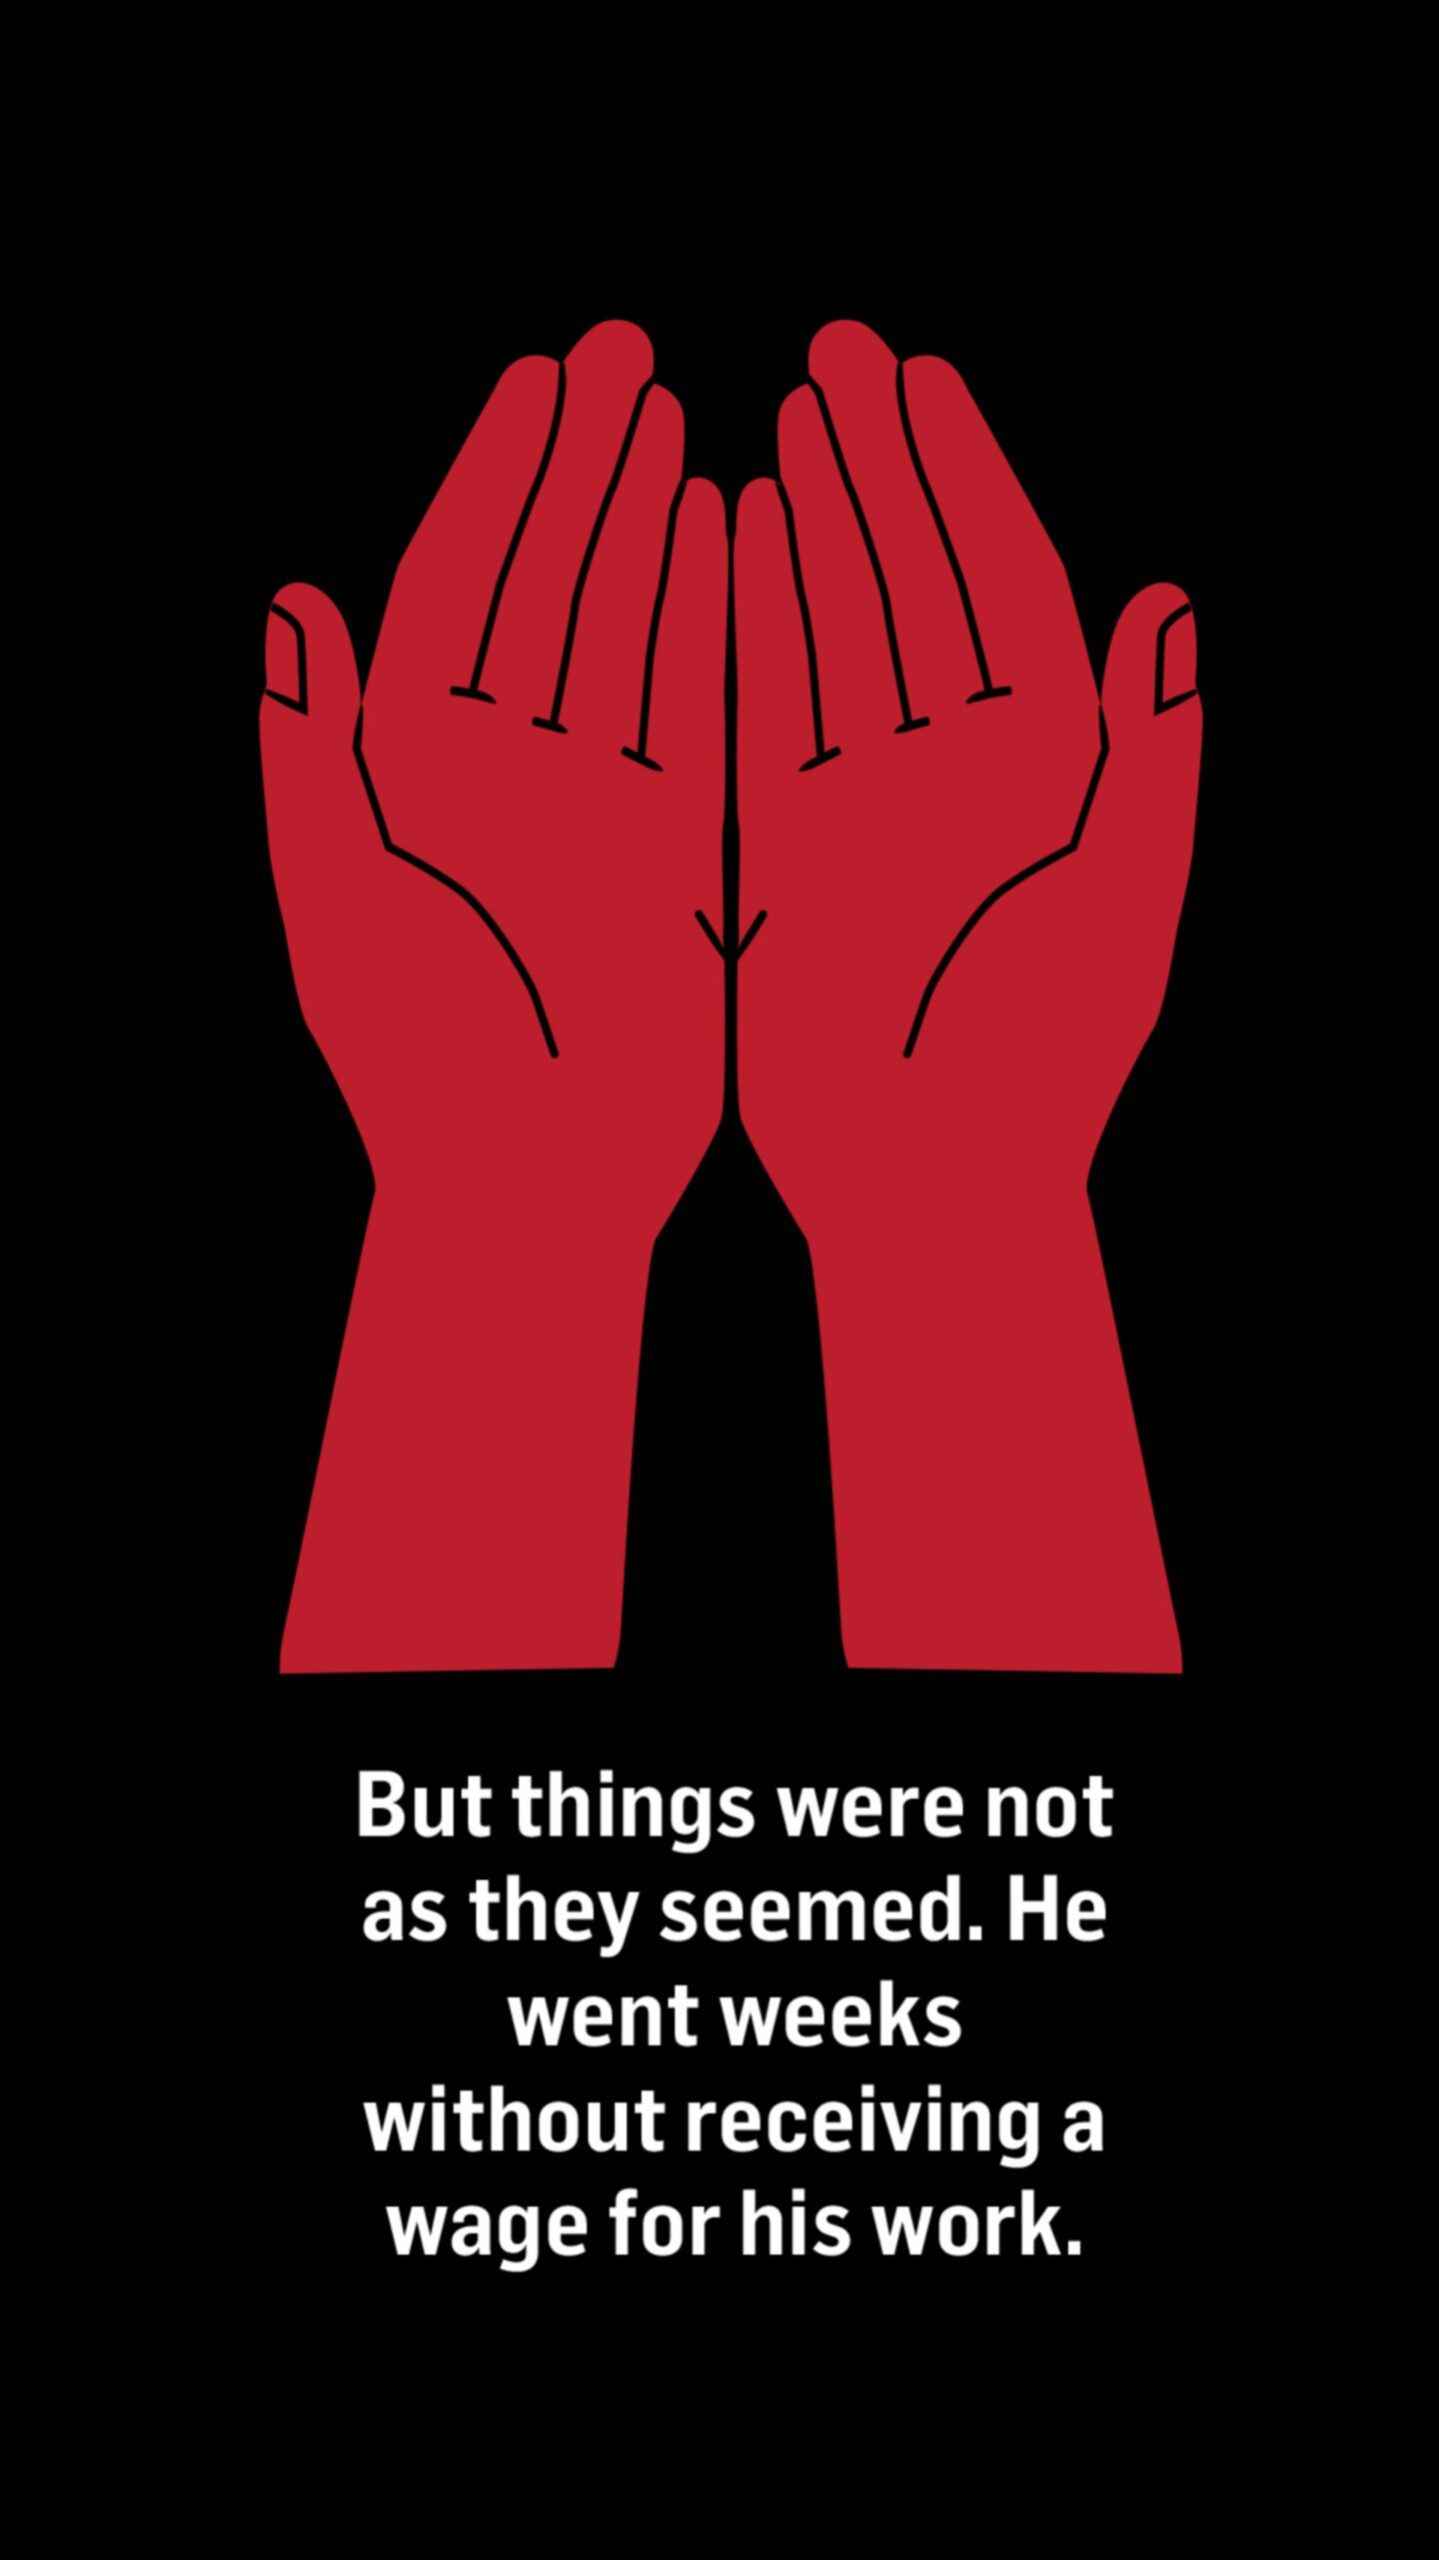 An illustration of hands held out and facing up. Words below the image read: But things were not as they seemed.

He went weeks without receiving a wage for his work.